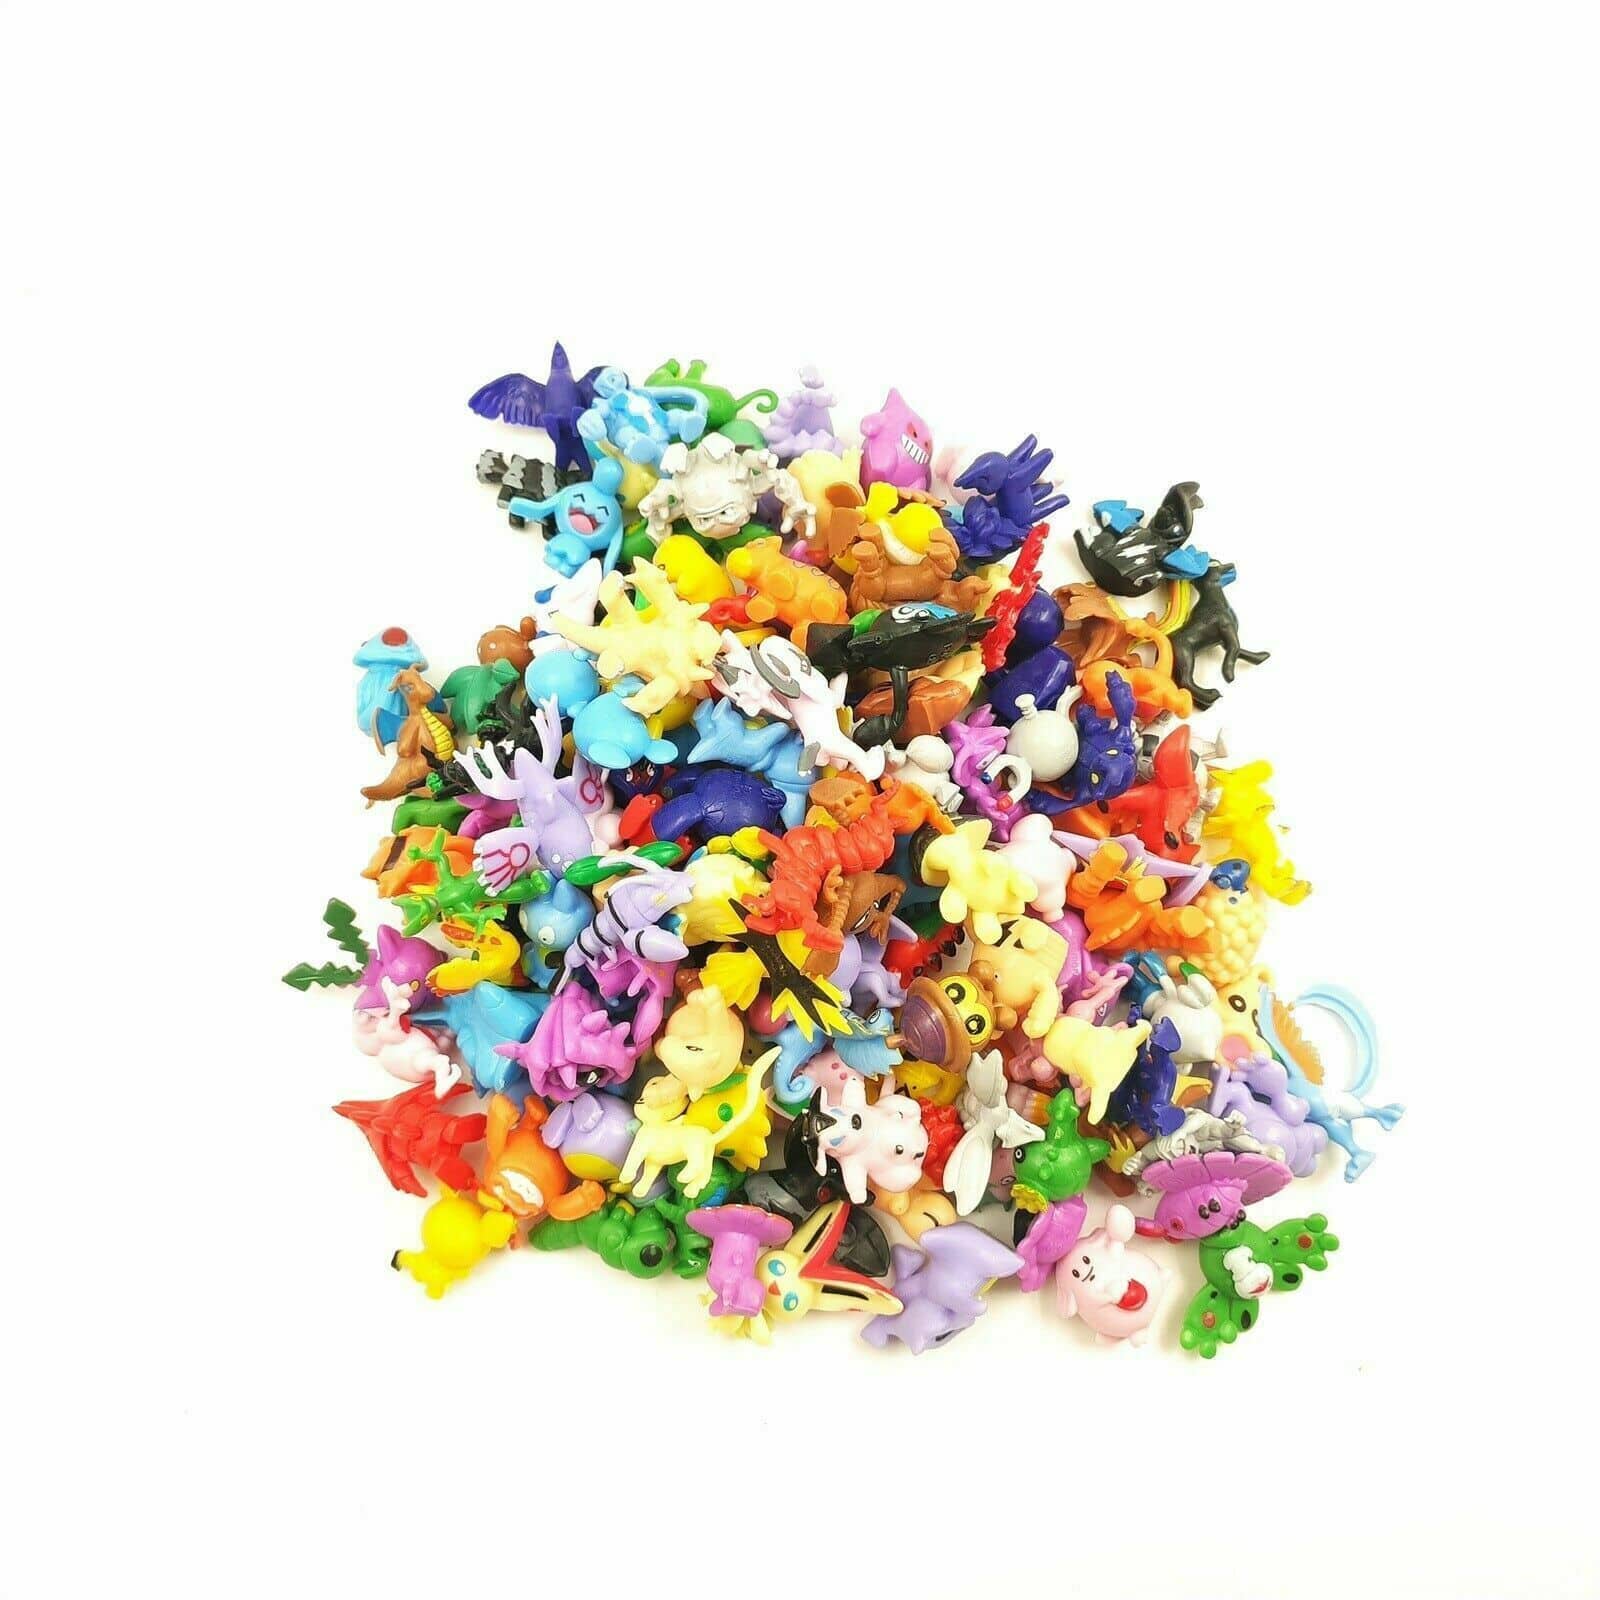 Pokemon Toy Set: 24/144 Pieces of Action Figures, Anime Dolls - Perfect Kids' Party or Christmas Gift